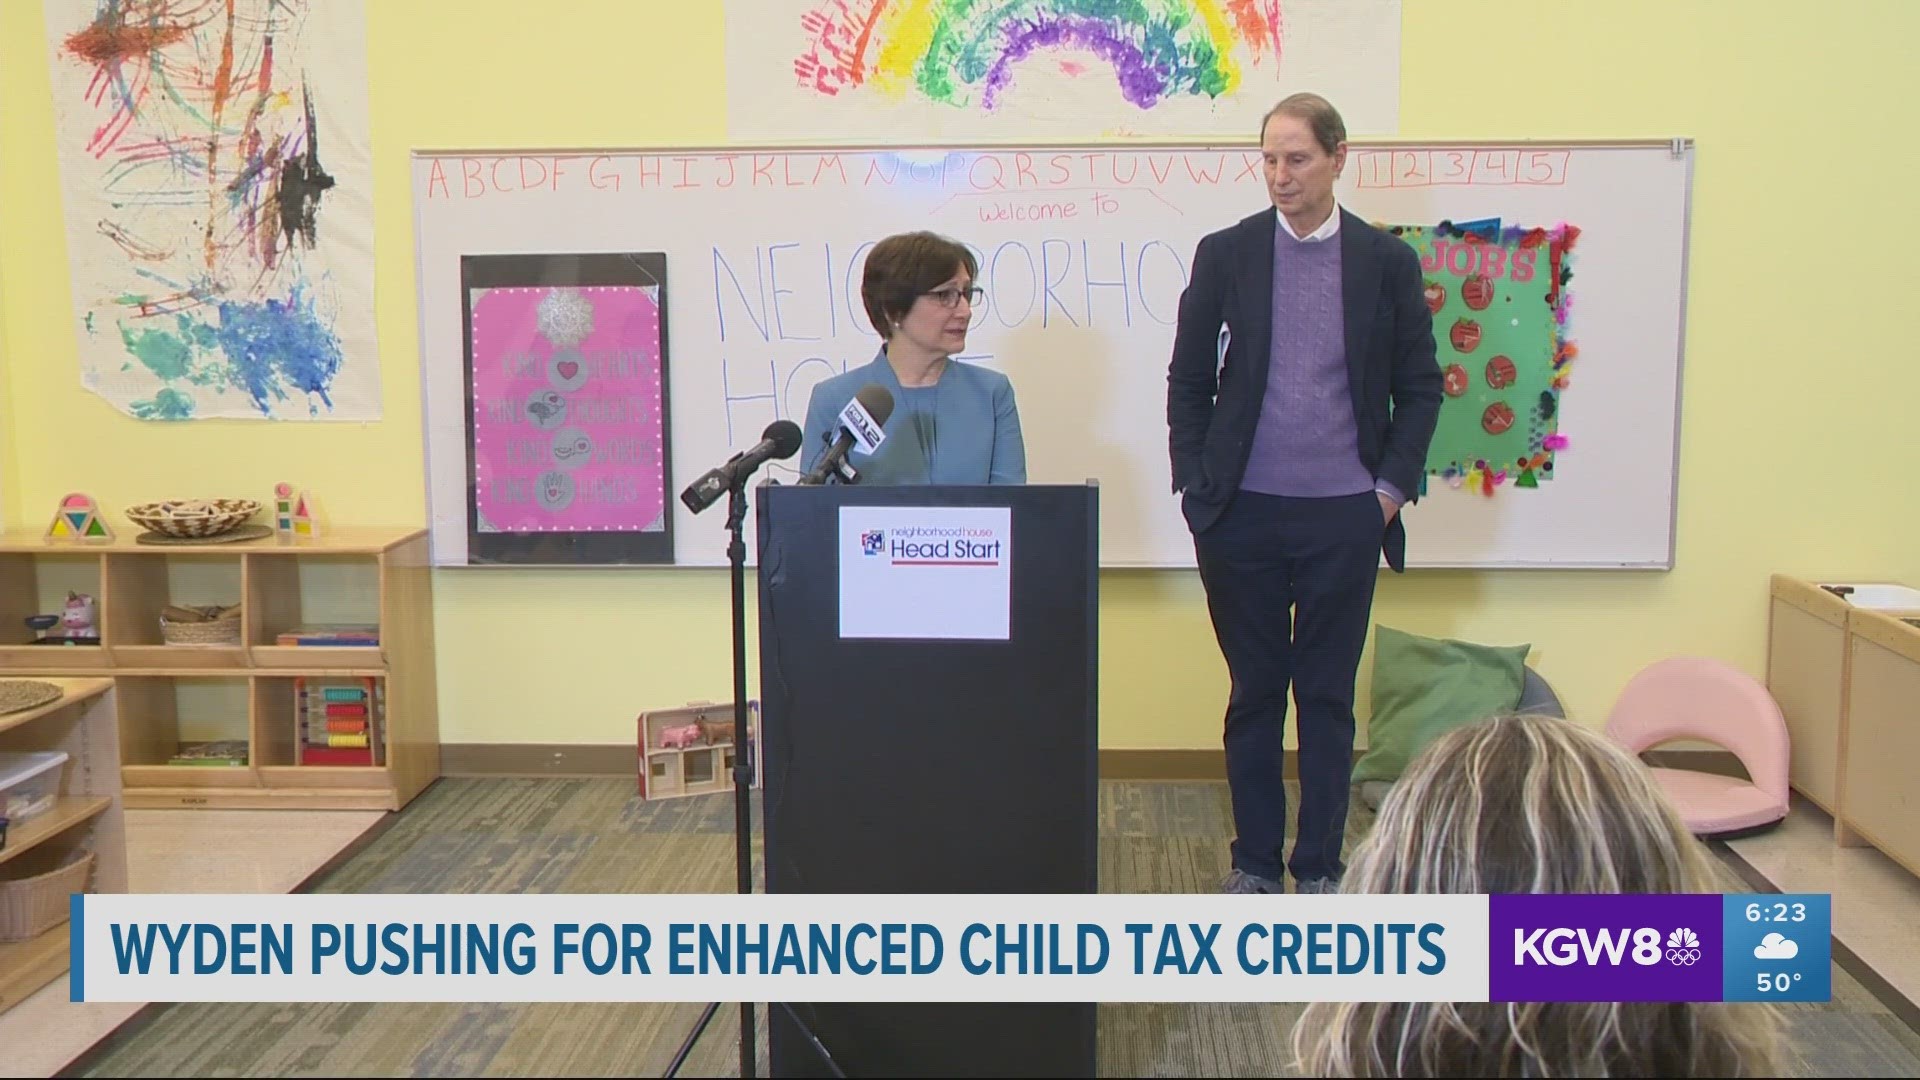 The proposed legislation would increase the child tax credit cap and allow parents to claim the credit for each child in the family.